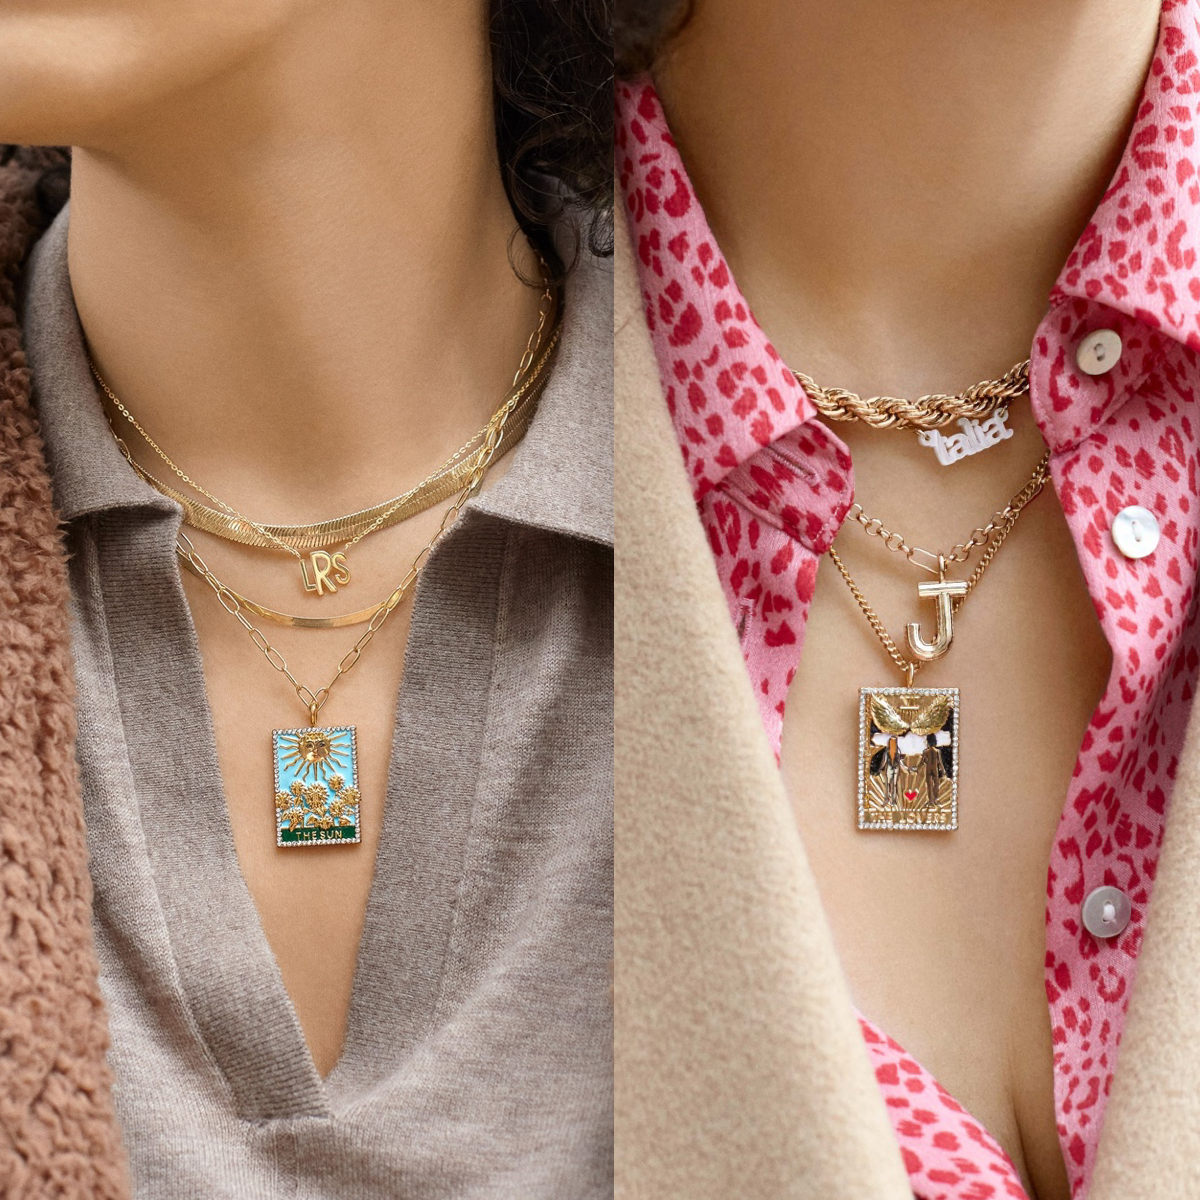 BaubleBar’s $60 Fan-Fave Tarot Necklaces Are Just $20 This 4th of July